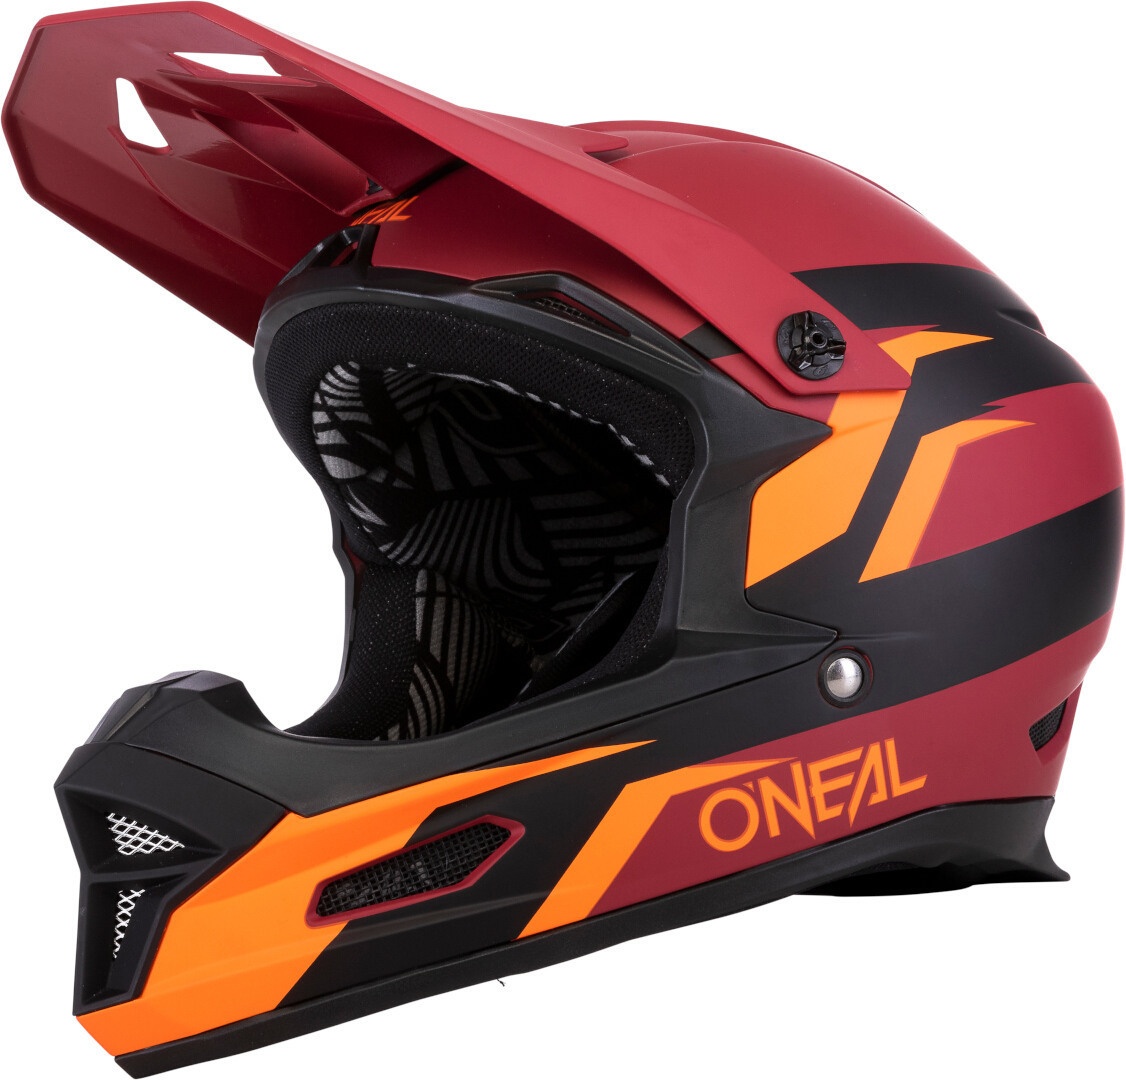 Oneal Fury Stage Downhill Helm, rood-oranje, XS